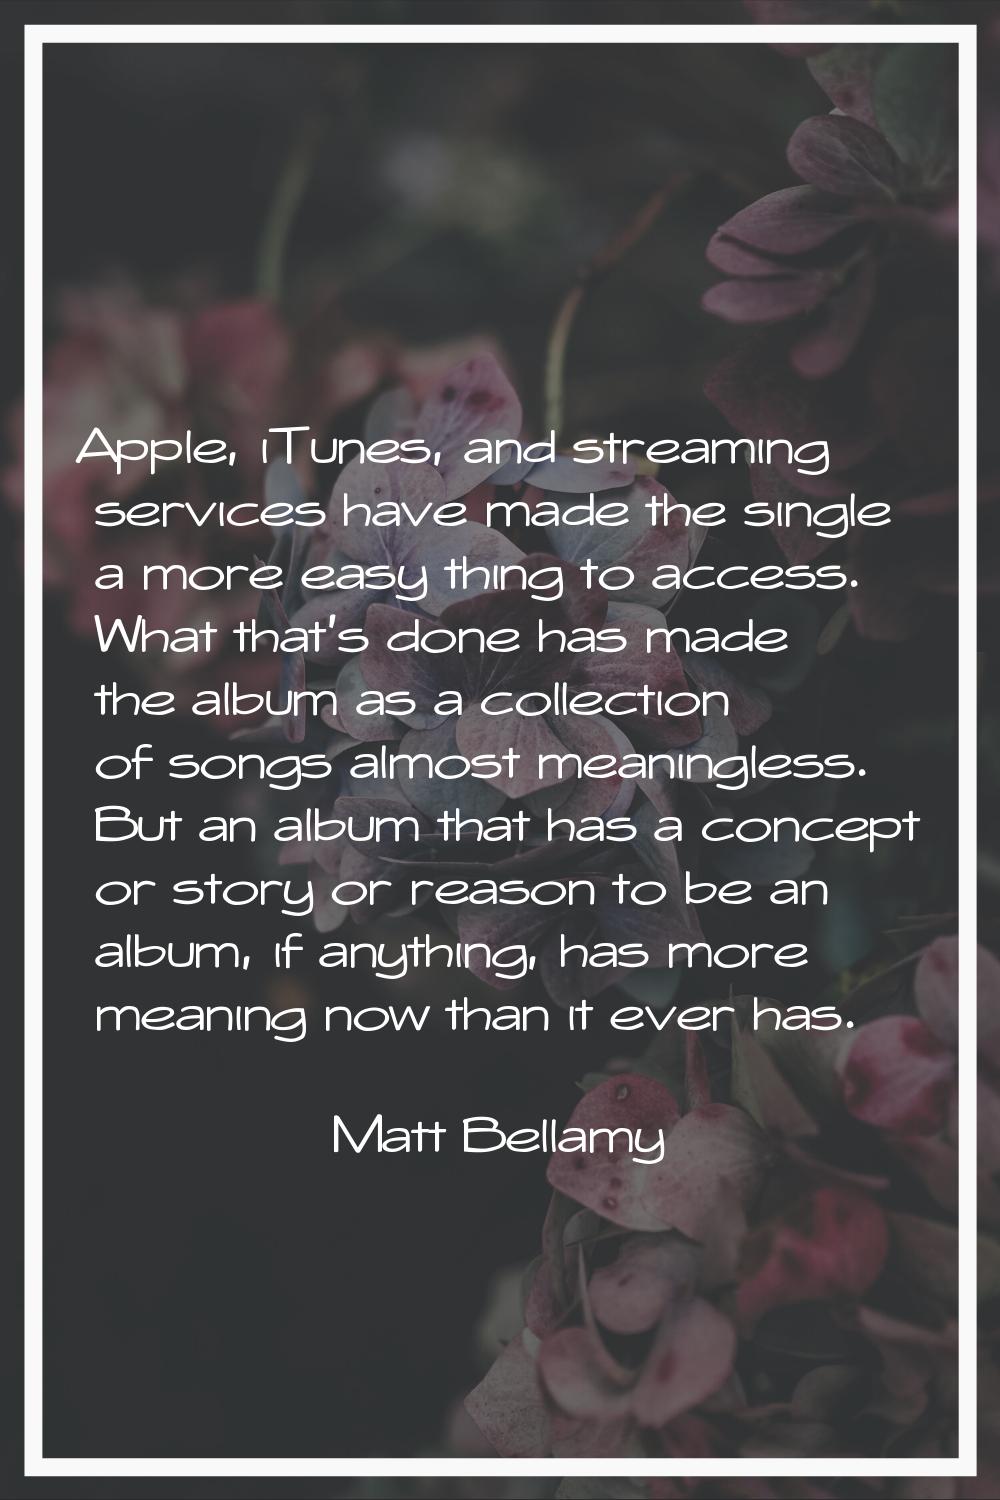 Apple, iTunes, and streaming services have made the single a more easy thing to access. What that's